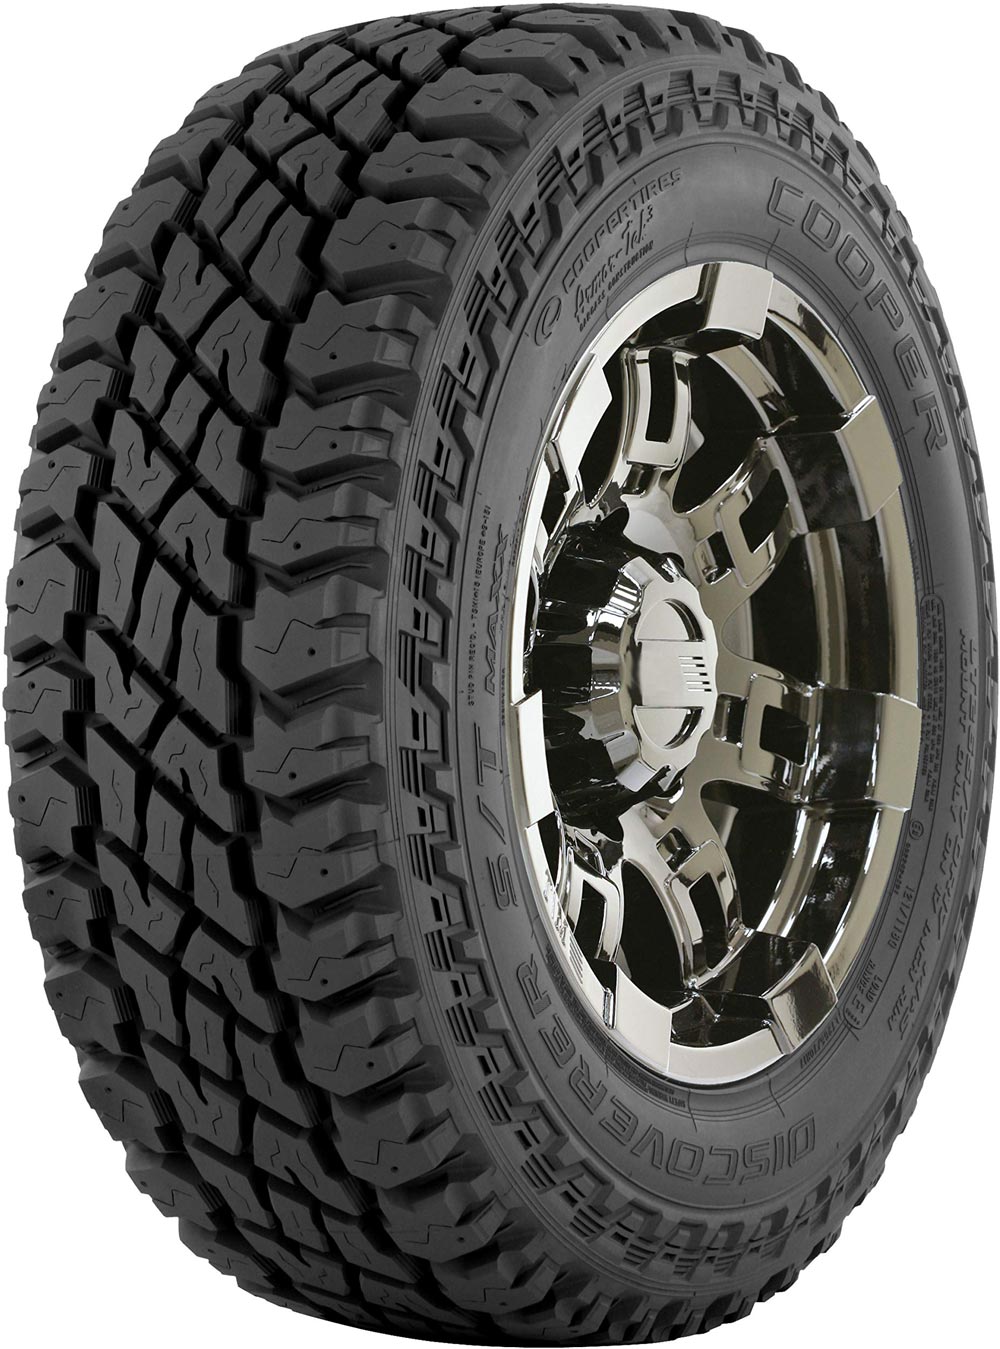 COOPER DISCOVERER ST MAXX P O BSW 31/10.5 R15 109Q